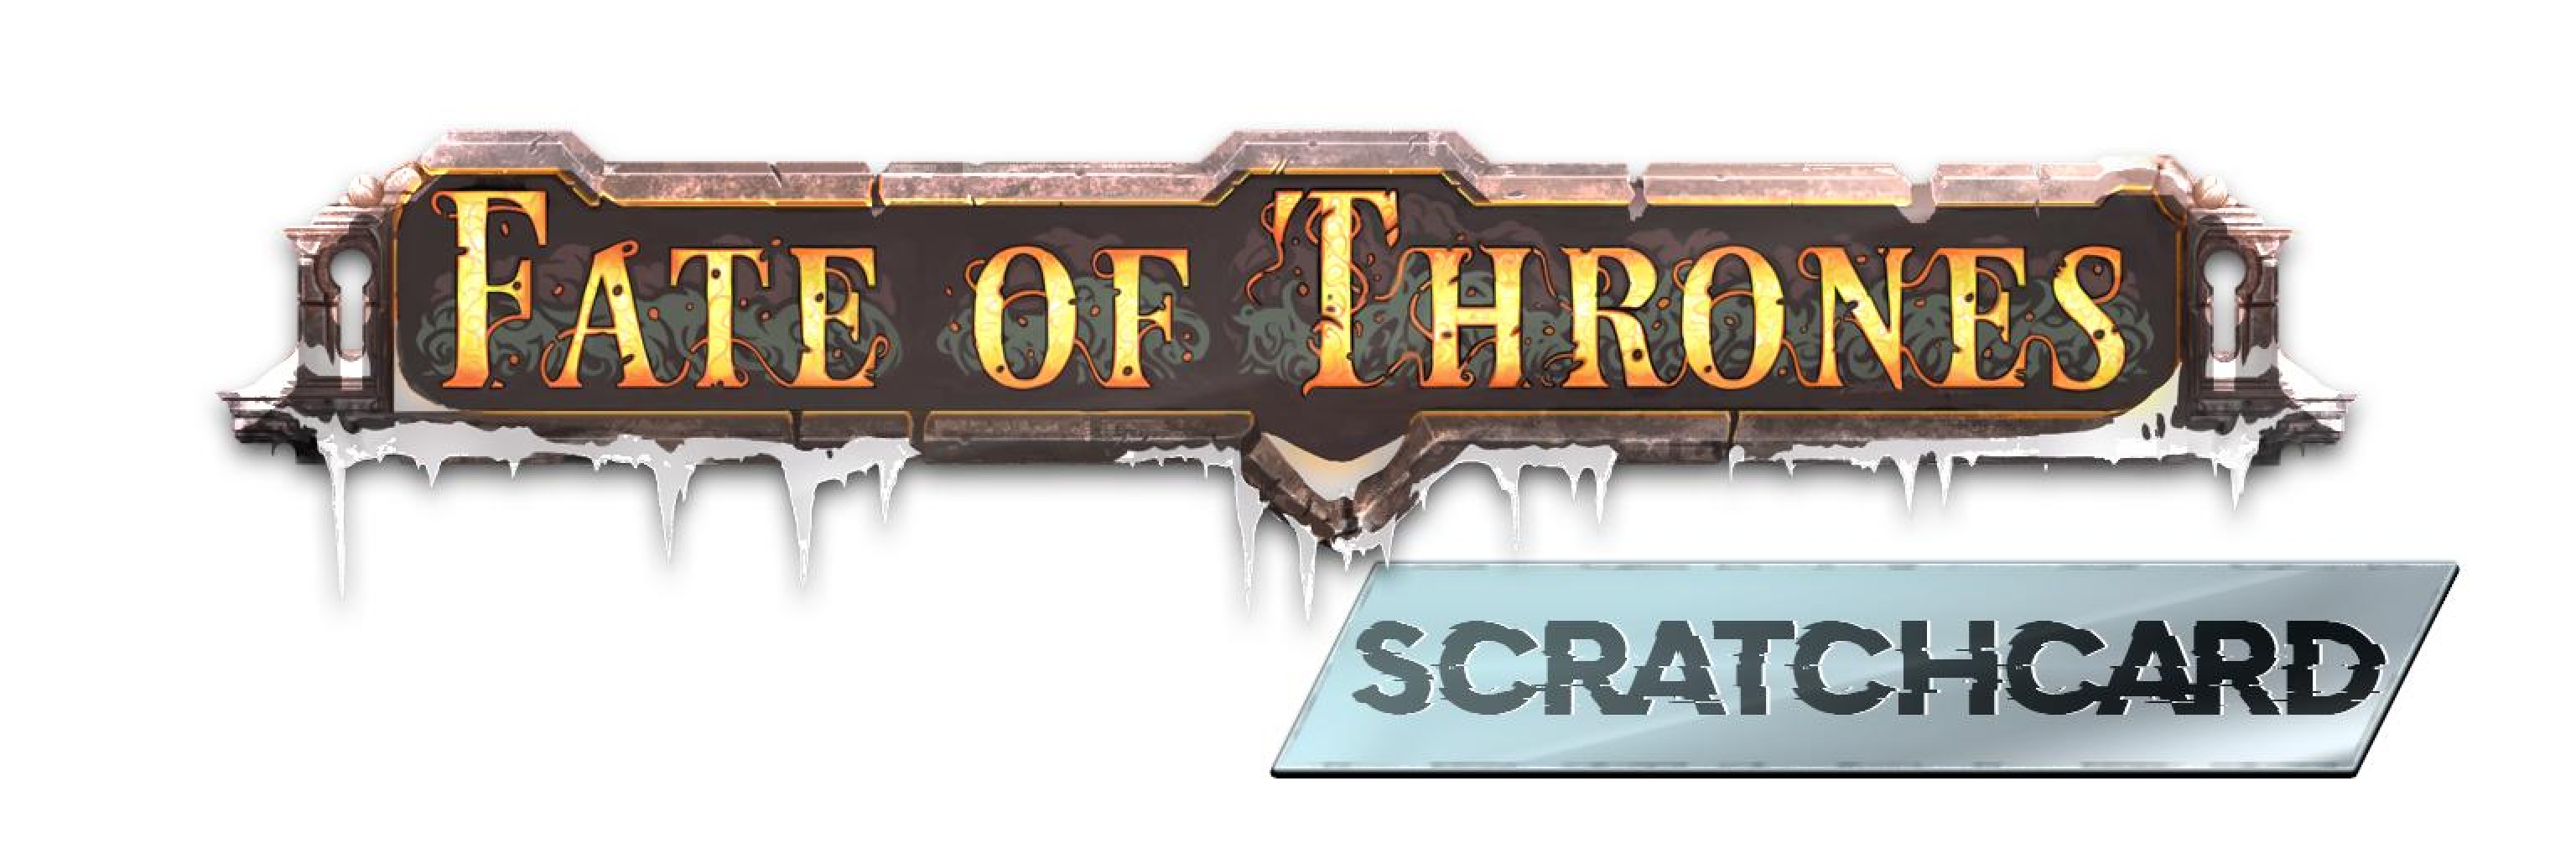 Fate of Throne Scratchcard demo